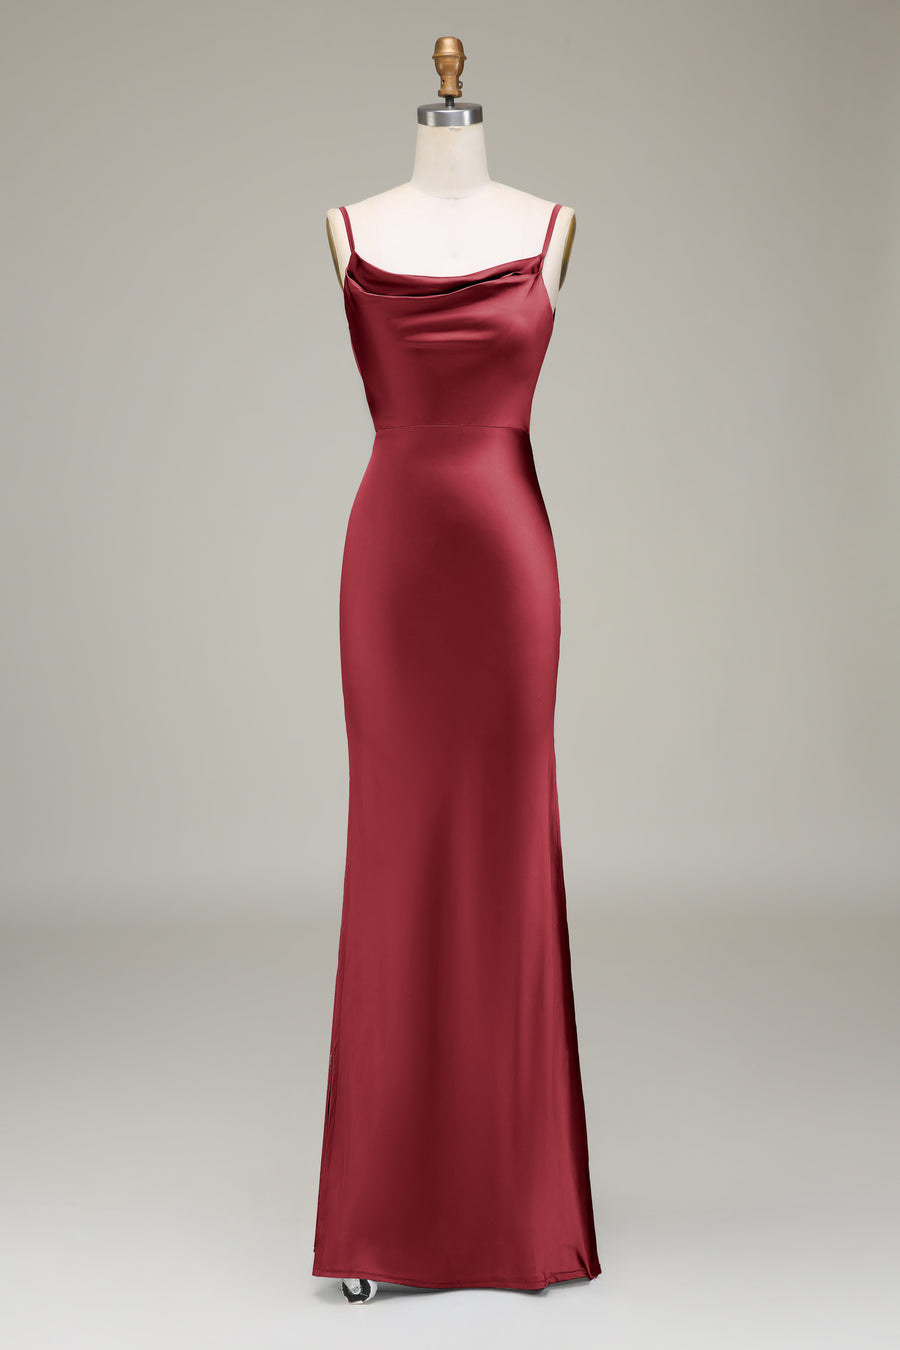 Cowl Neck and Back Maxi Dress in red